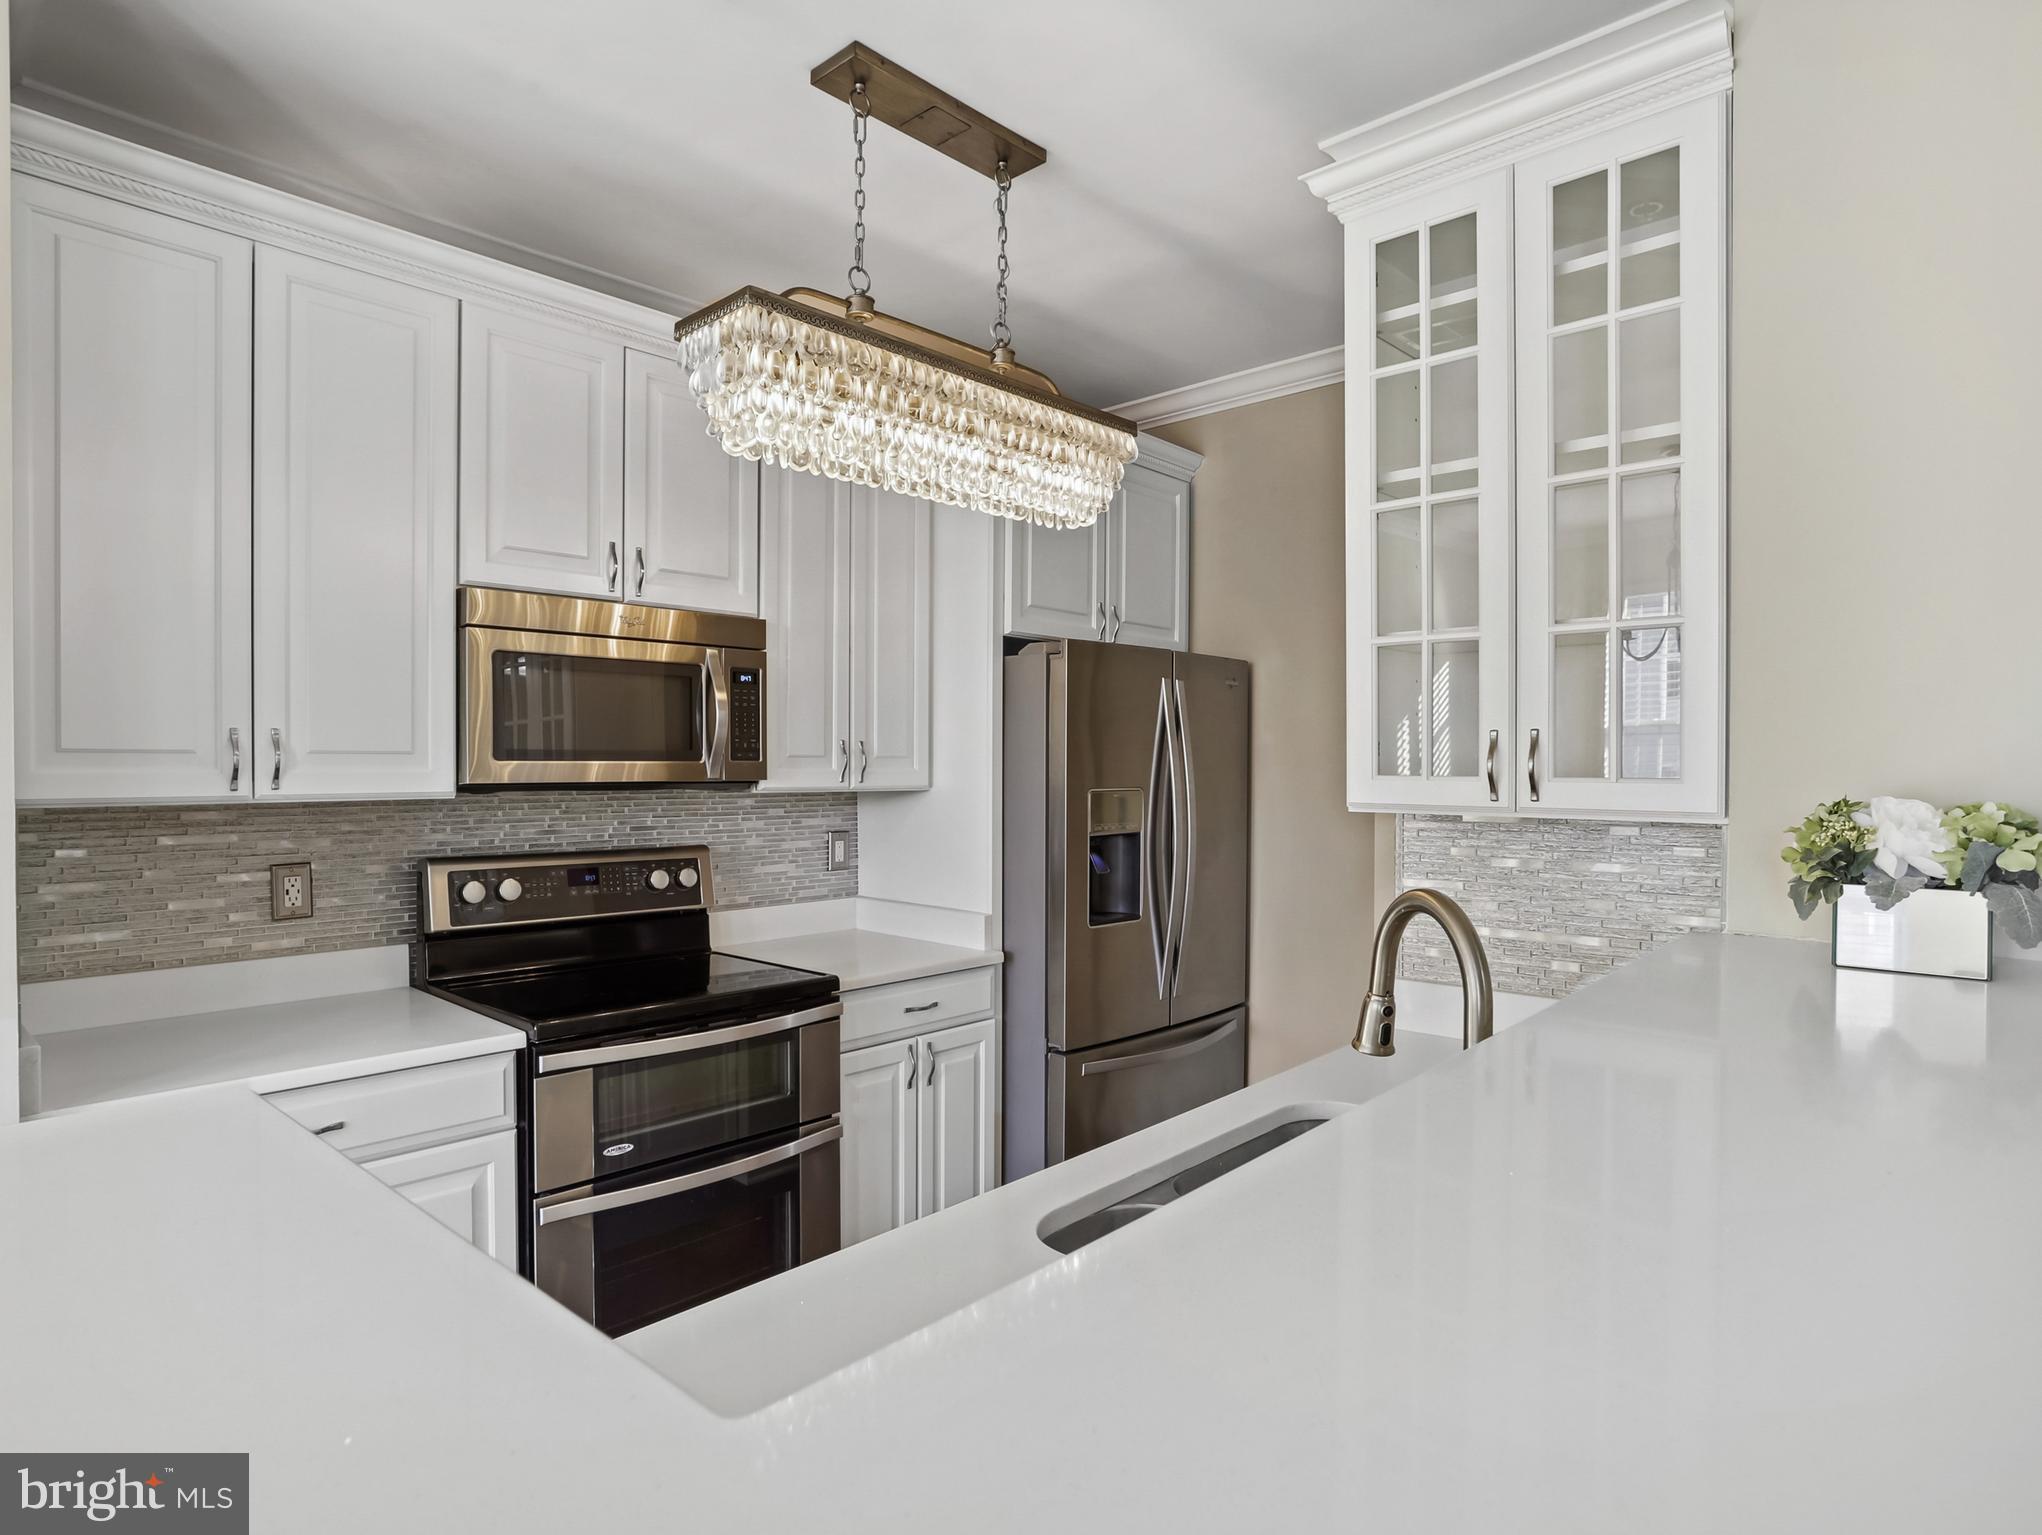 a kitchen with stainless steel appliances a stove a sink a microwave and cabinets